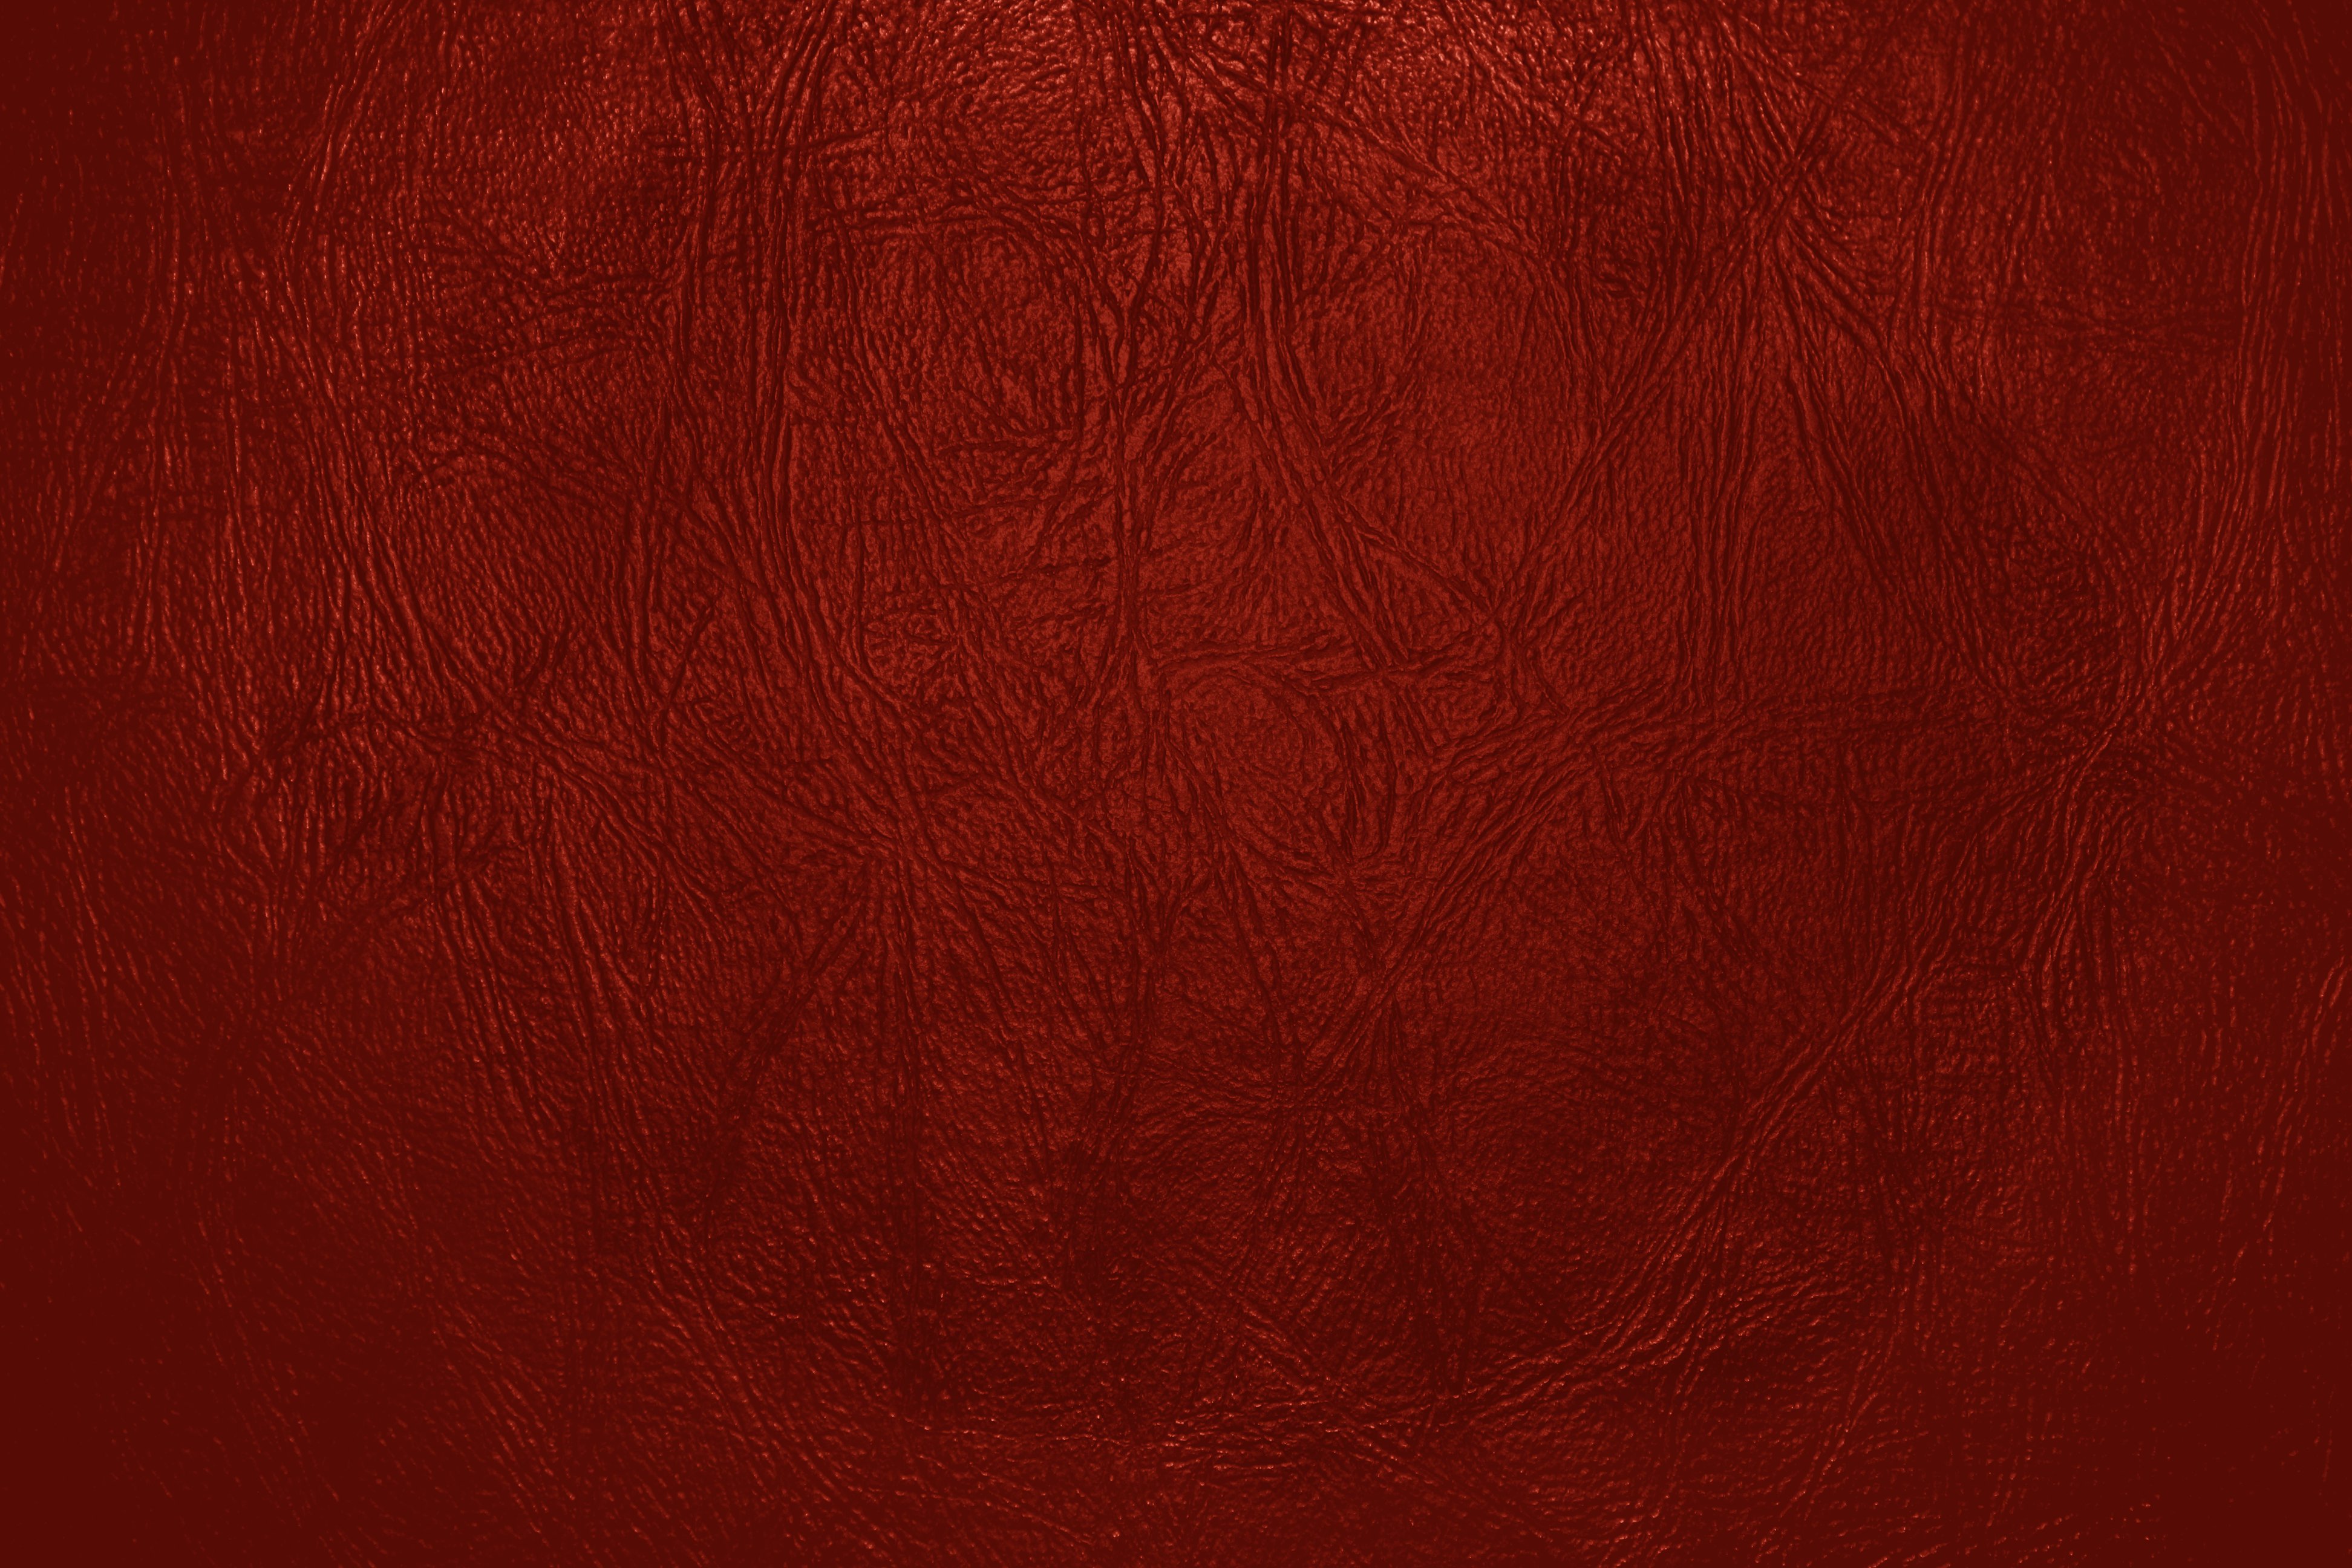 Red Leather Close Up Texture   Free High Resolution Photo   Dimensions